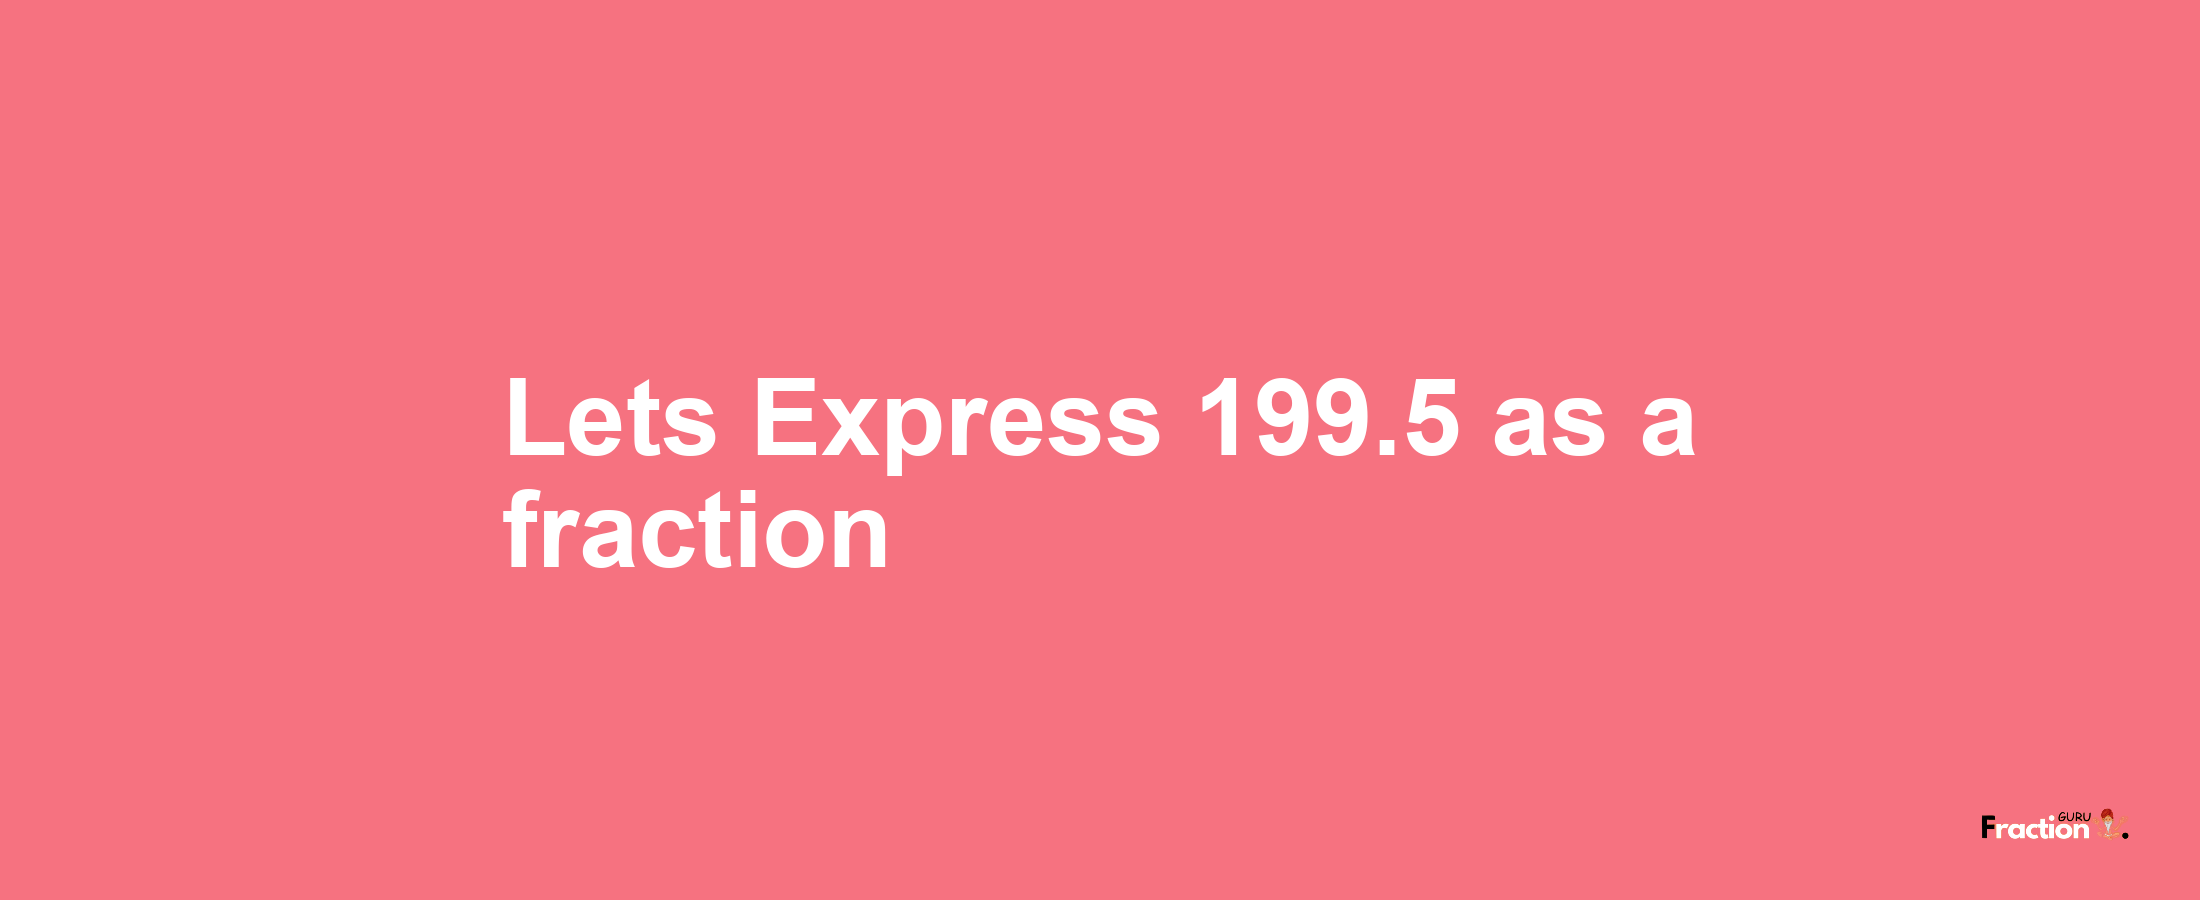 Lets Express 199.5 as afraction